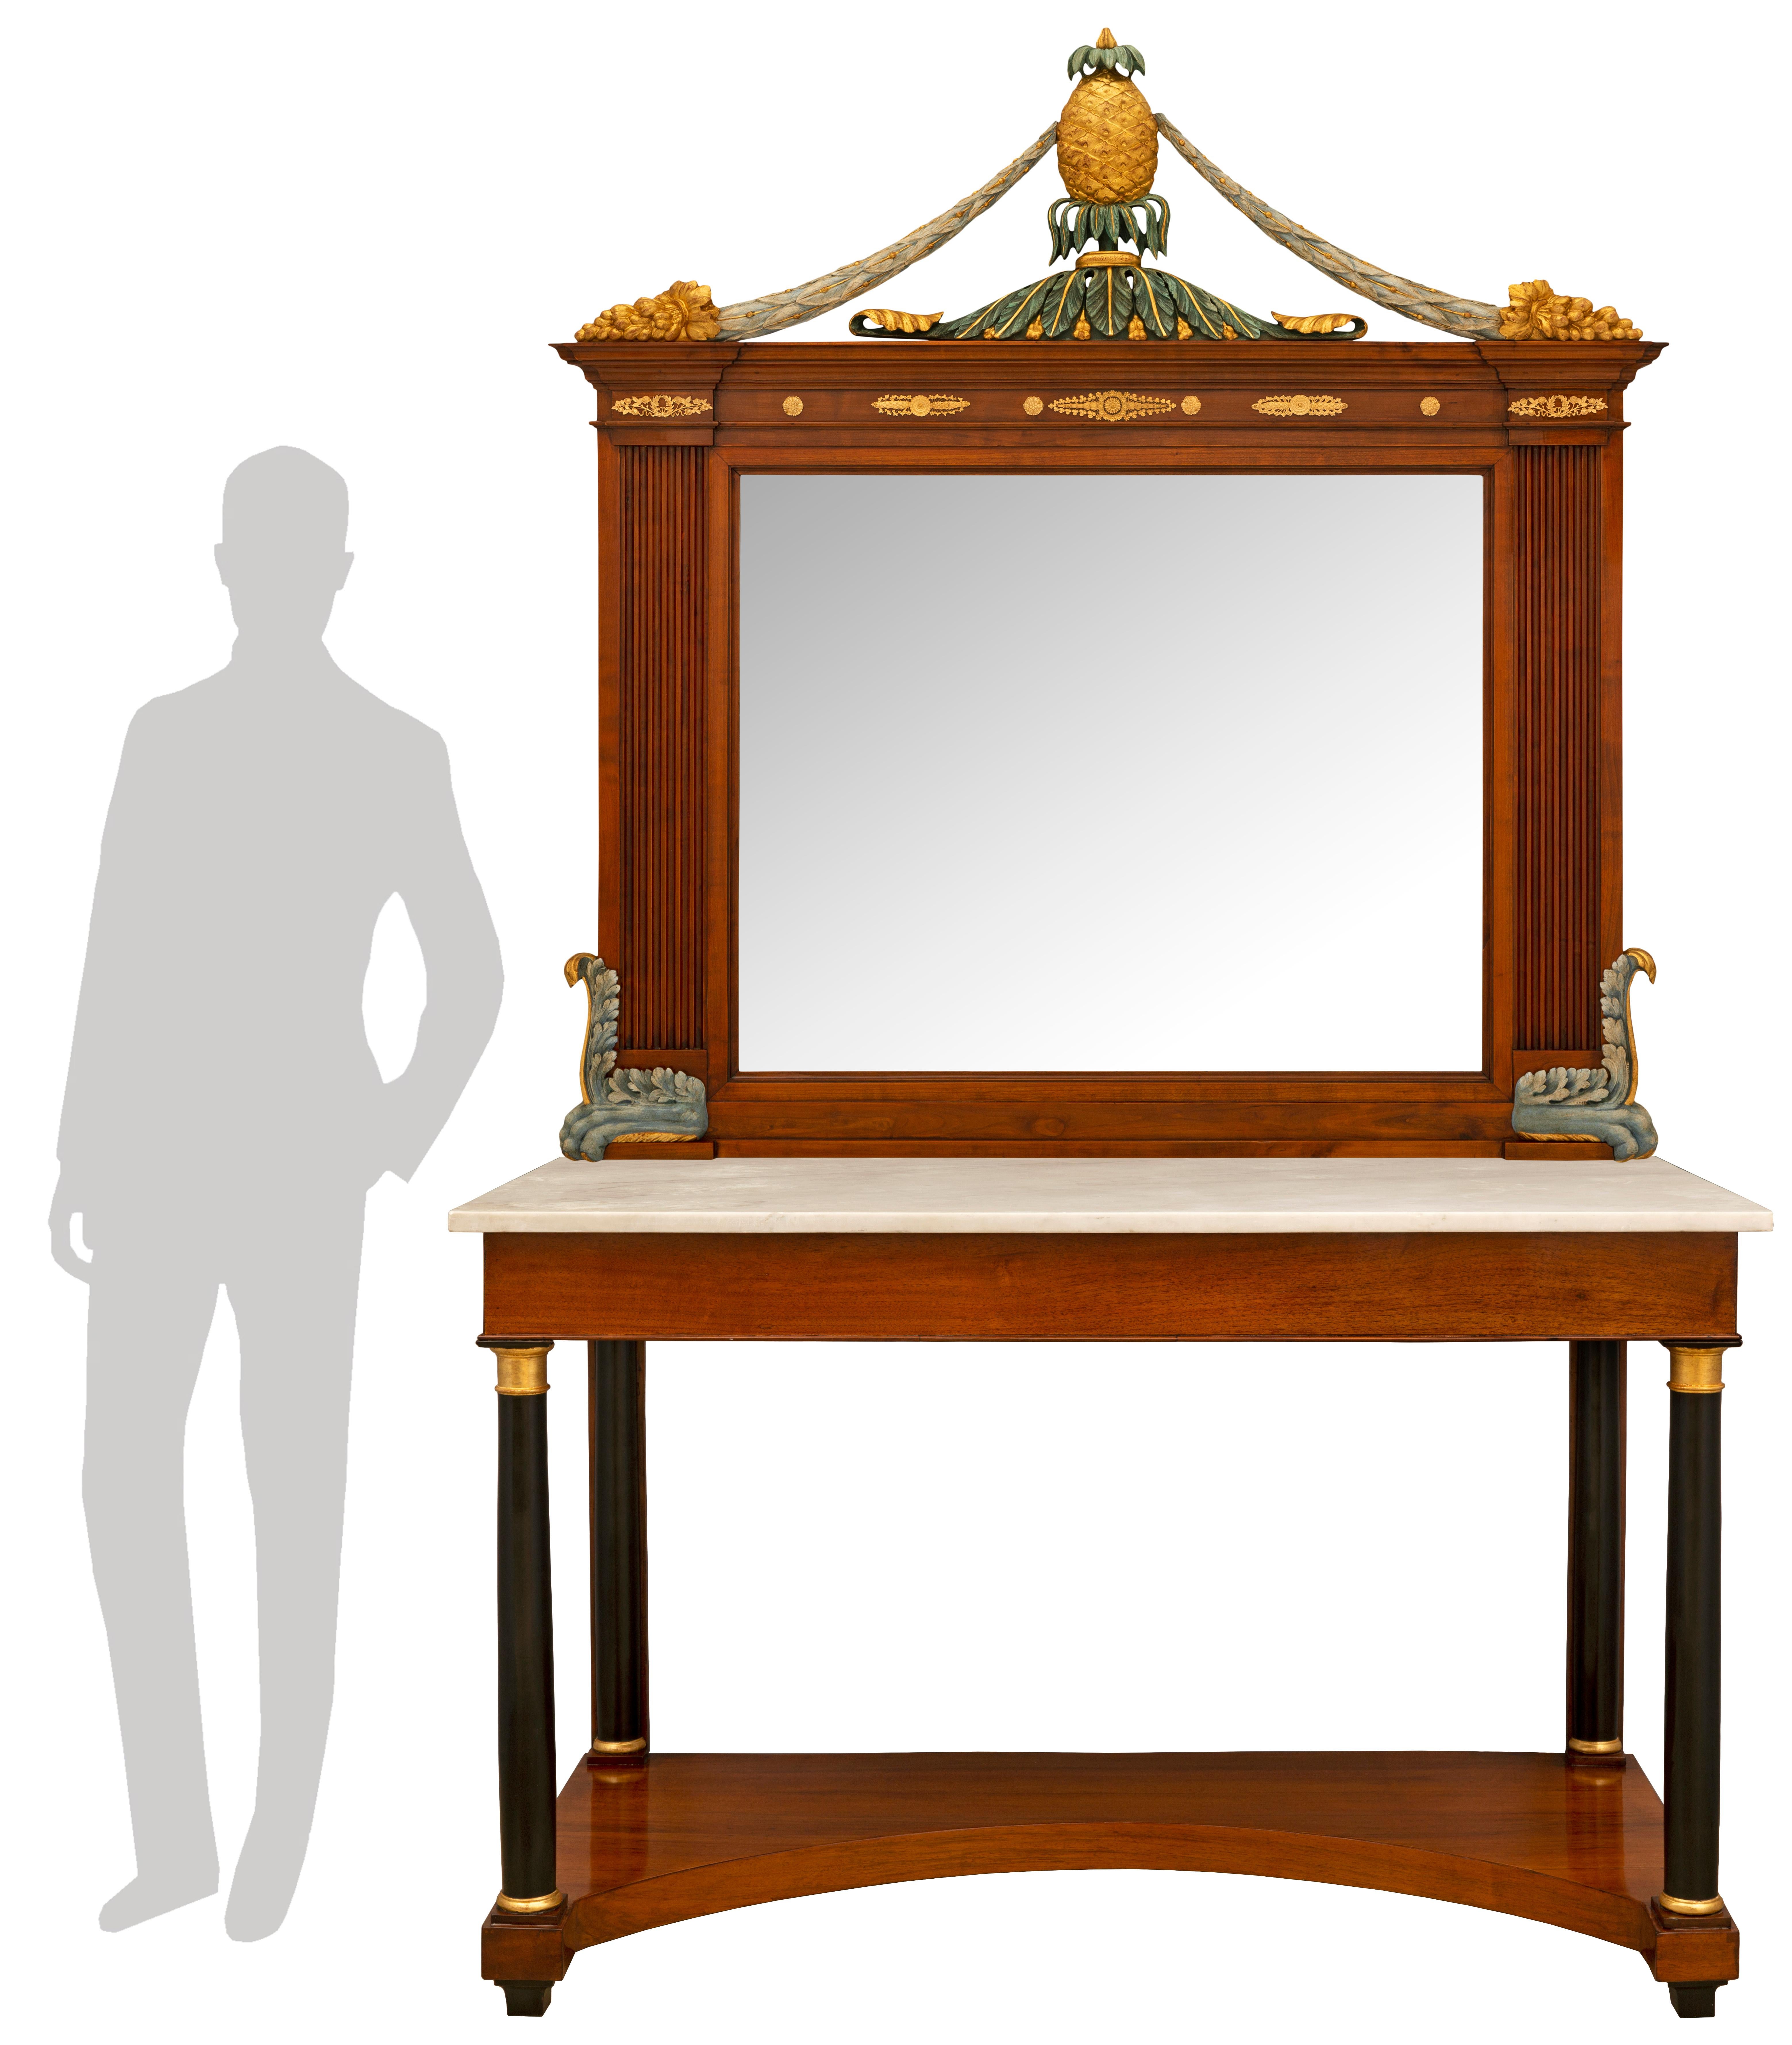 An impressive and most rare pair of Italian 19th century Neo-Classical st. Cherrywood, giltwood, polychrome, ebonized Fruitwood, ormolu matching mirrors and consoles. The consoles are raised by elegant square mottled supports below a most decorative